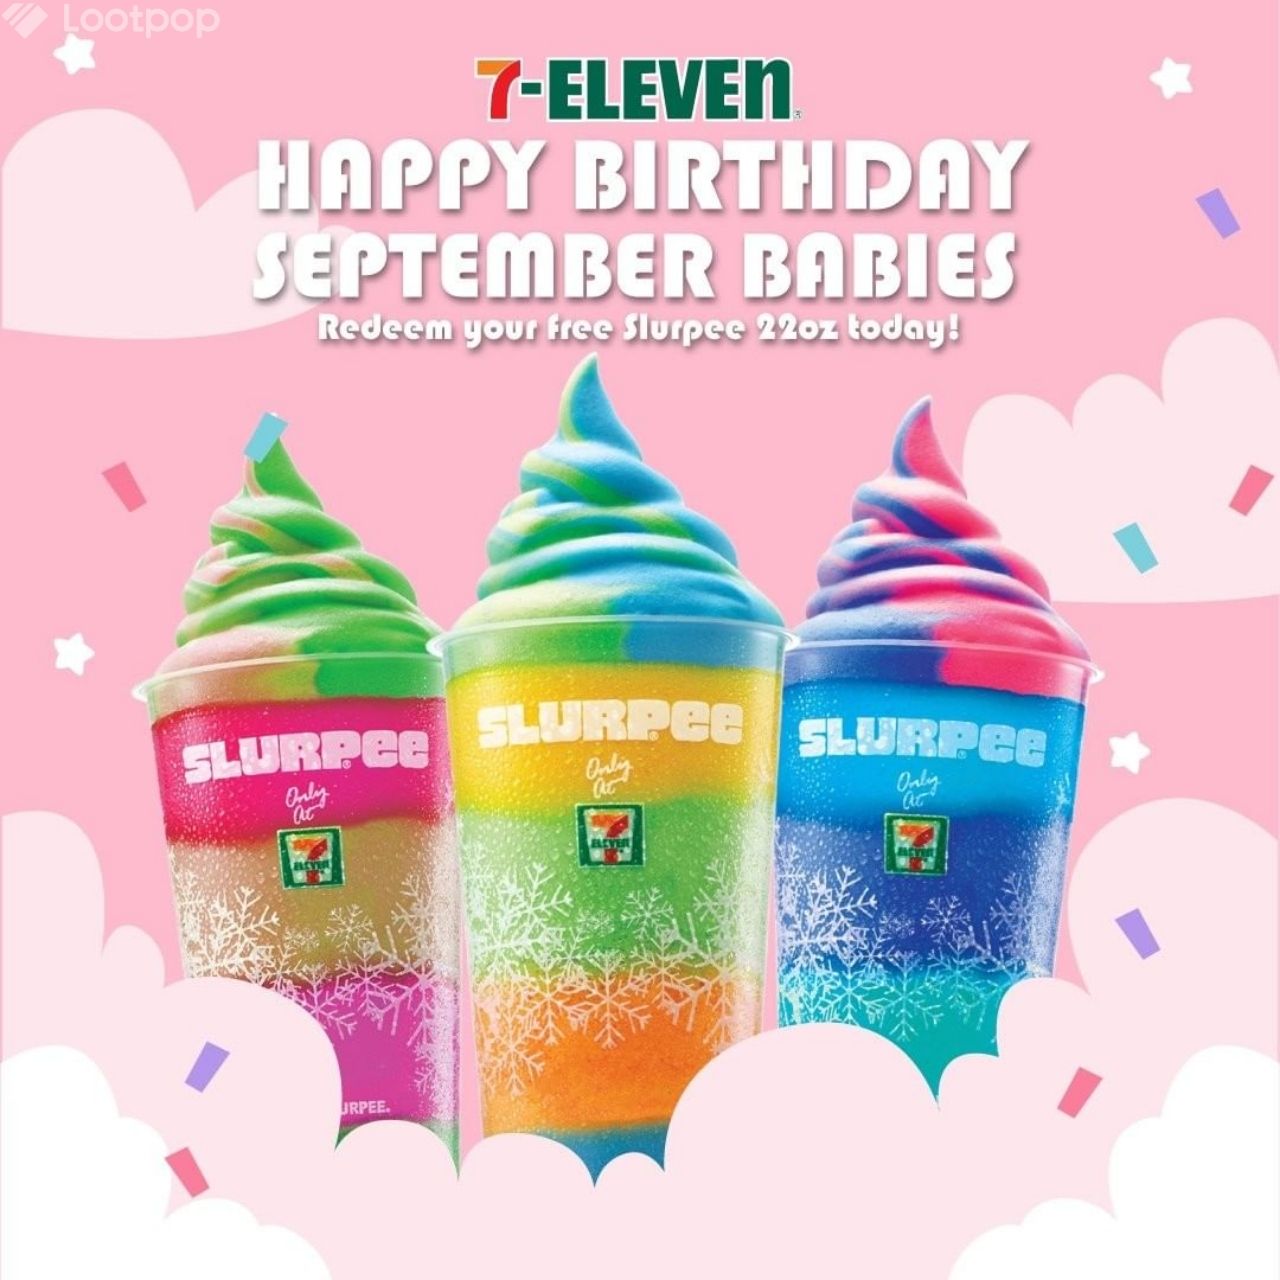 Birthday Gift for September Babies from 7-Eleven Malaysia